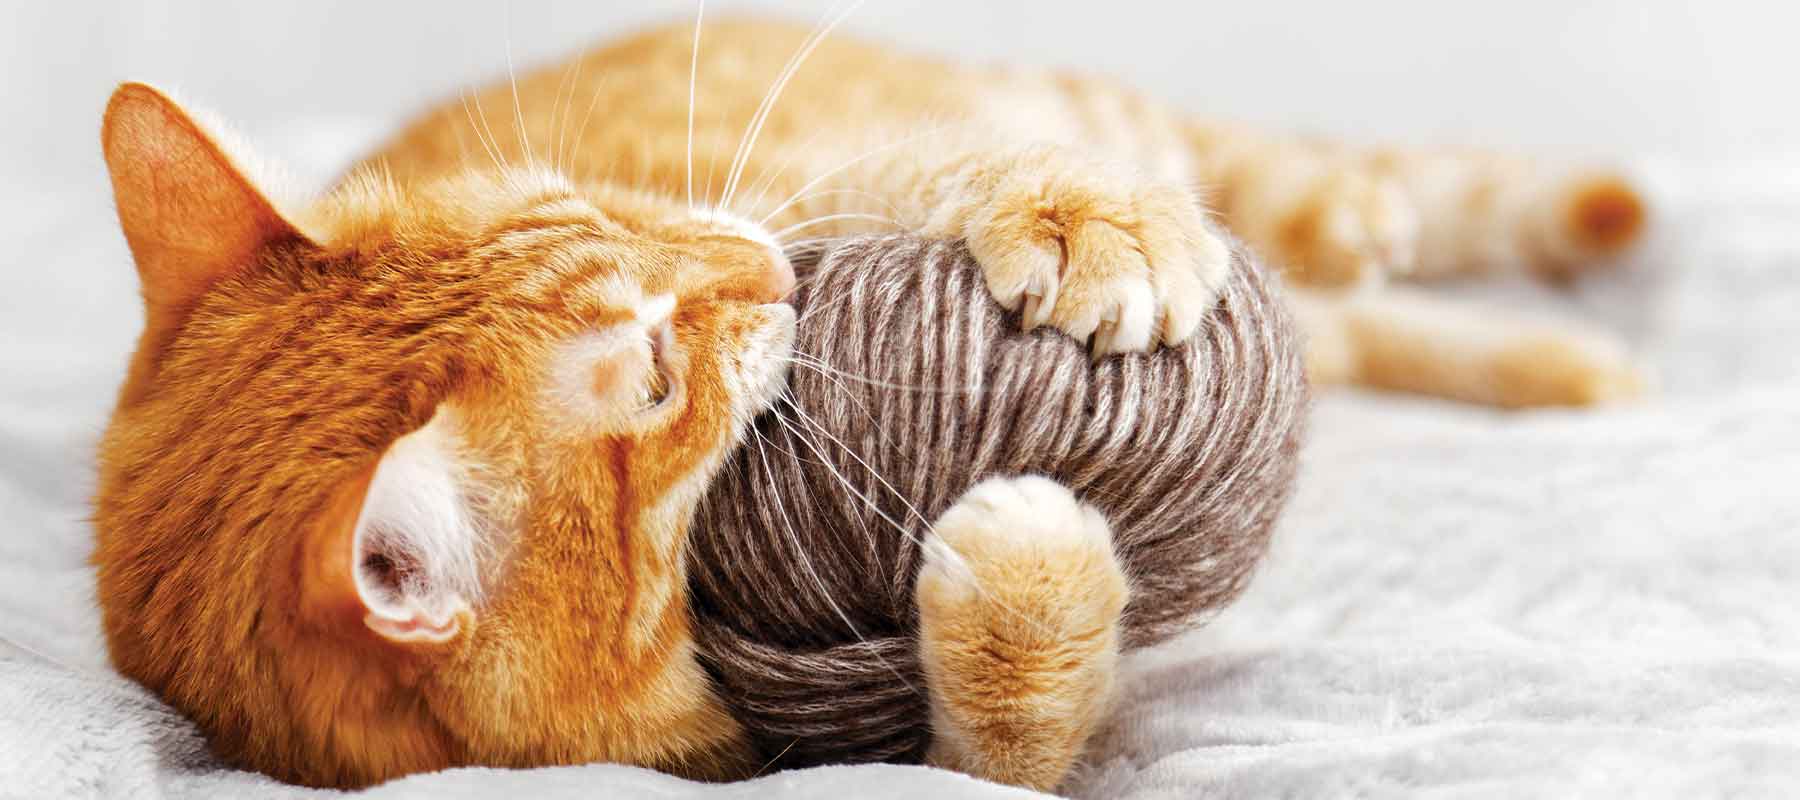 photo of cat with yarn